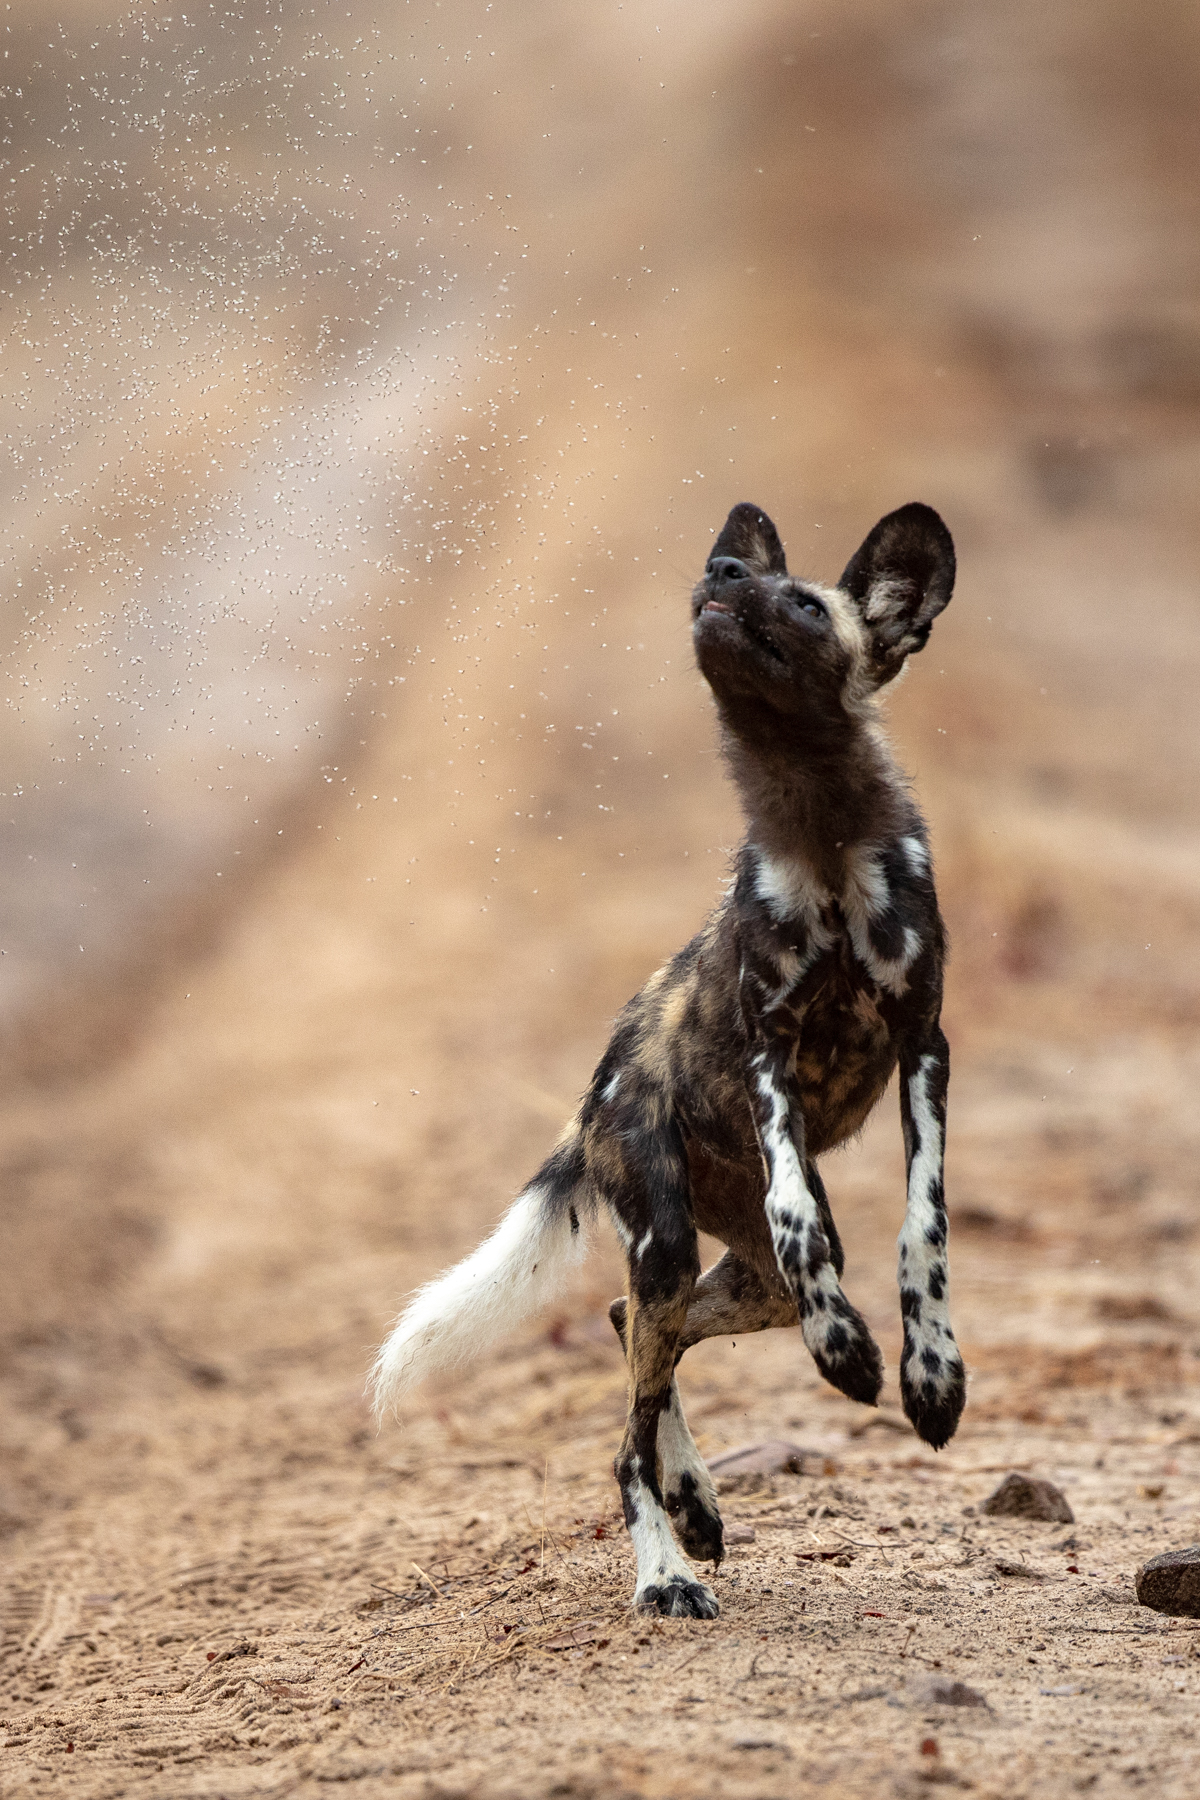 Tiny biting flies torment a Painted Wolf (or African Wild Dog) until it leaps up to catch some